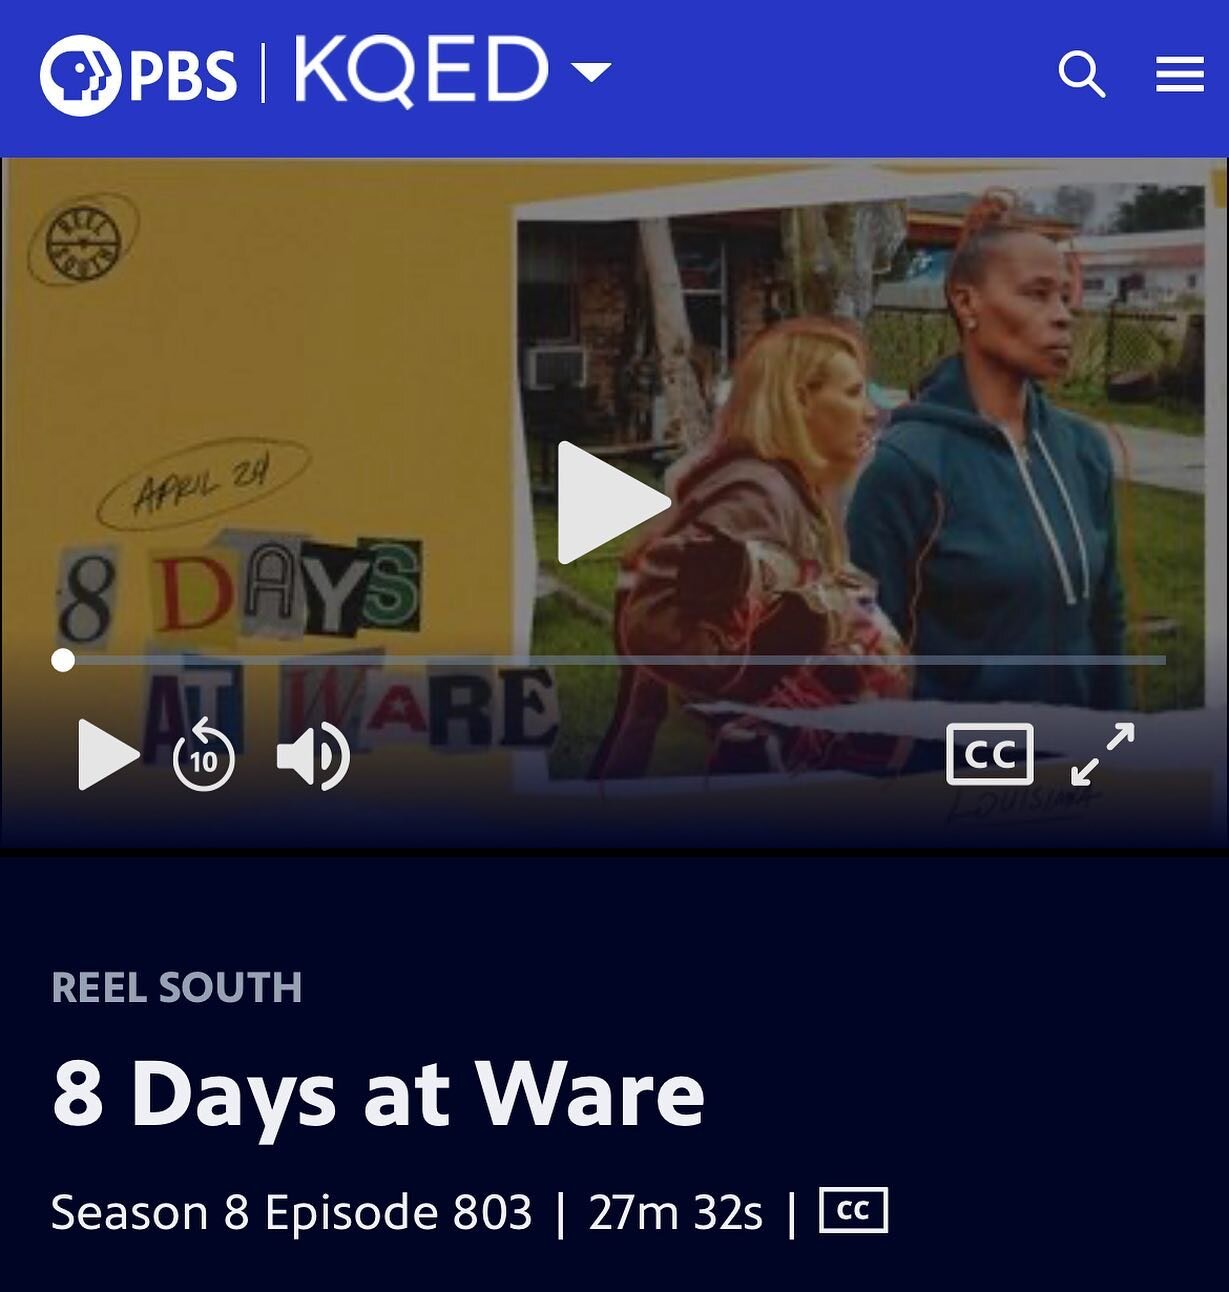 The wait is finally over: @pbs premiered 8 Days at Ware last night - we are part of this season of @reelsouthdocs ! You can watch for free on PBS. 

https://www.pbs.org/video/8-days-at-ware-cvtbb0/